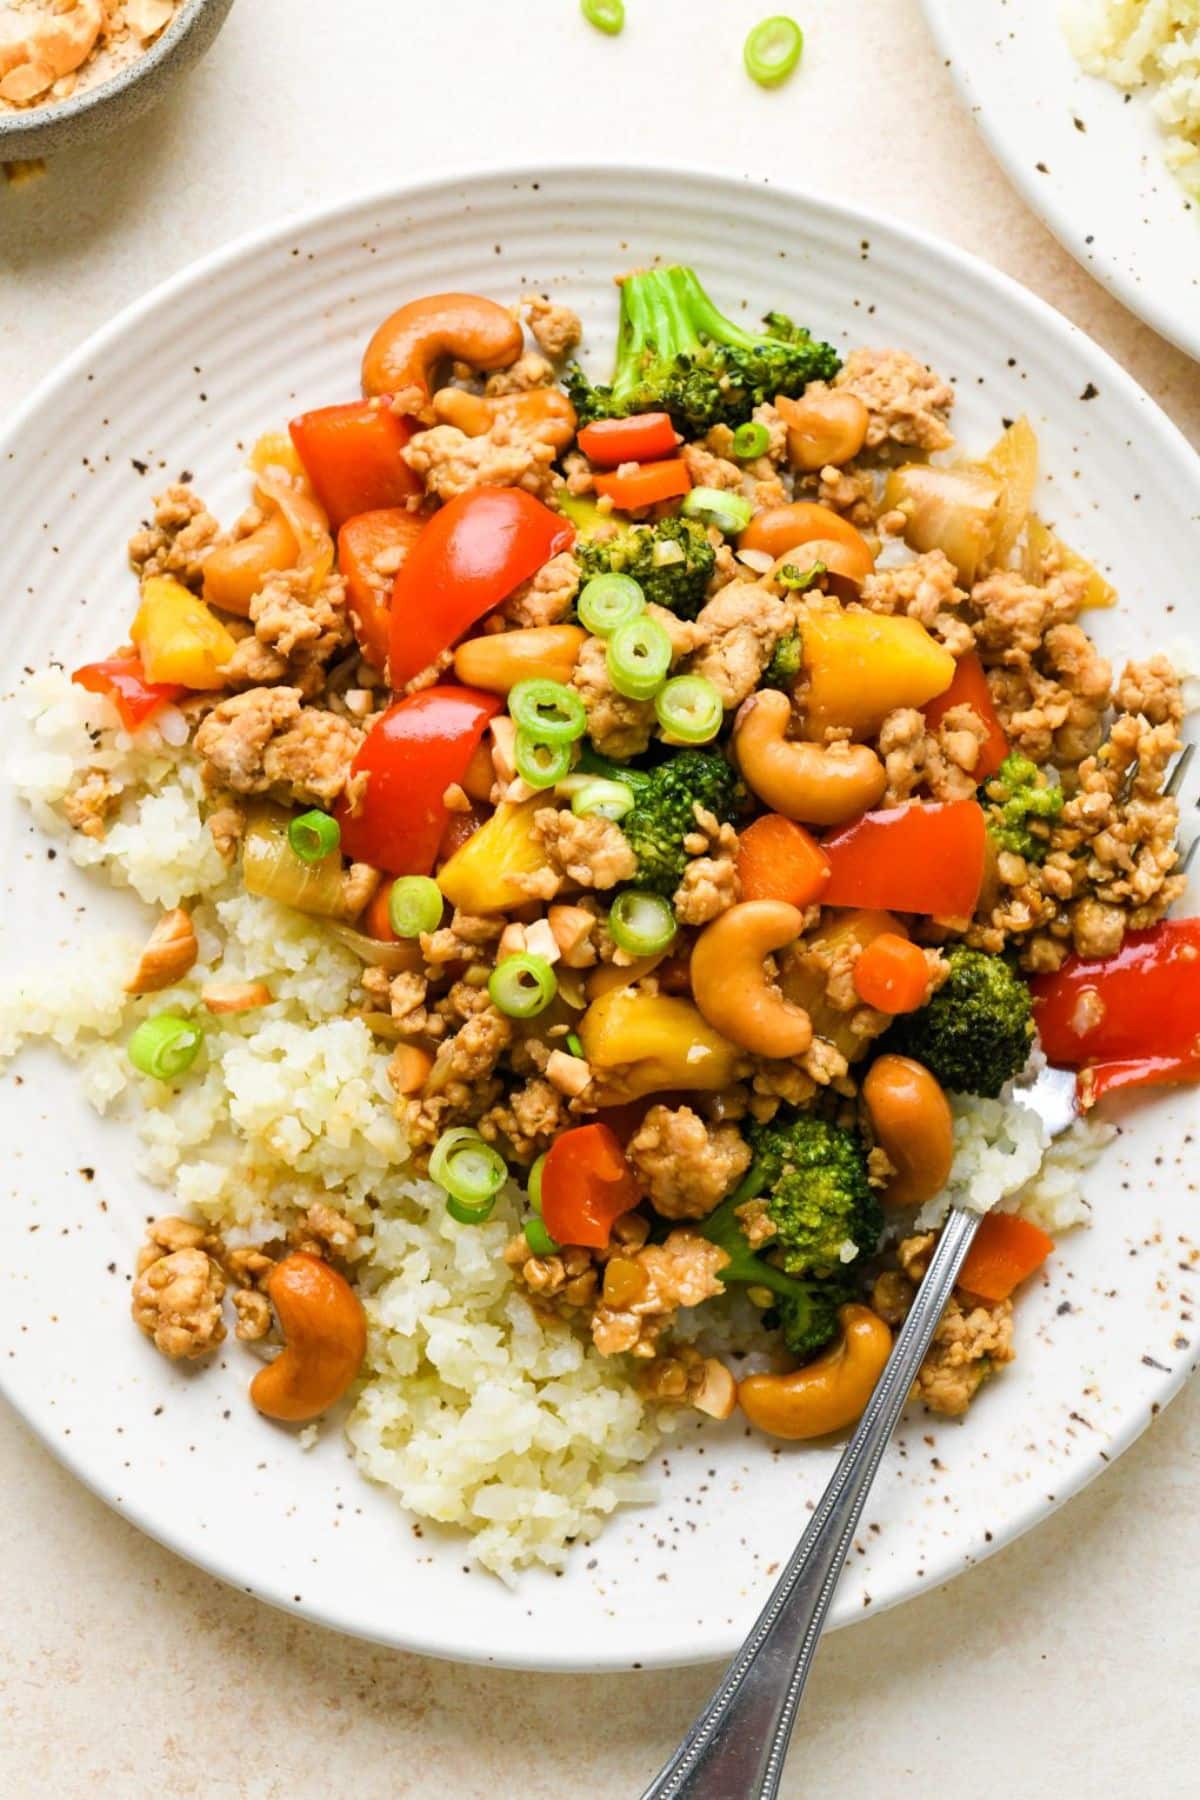 Healthy Cashew Chicken Stir Fry on a white plate with a fork.